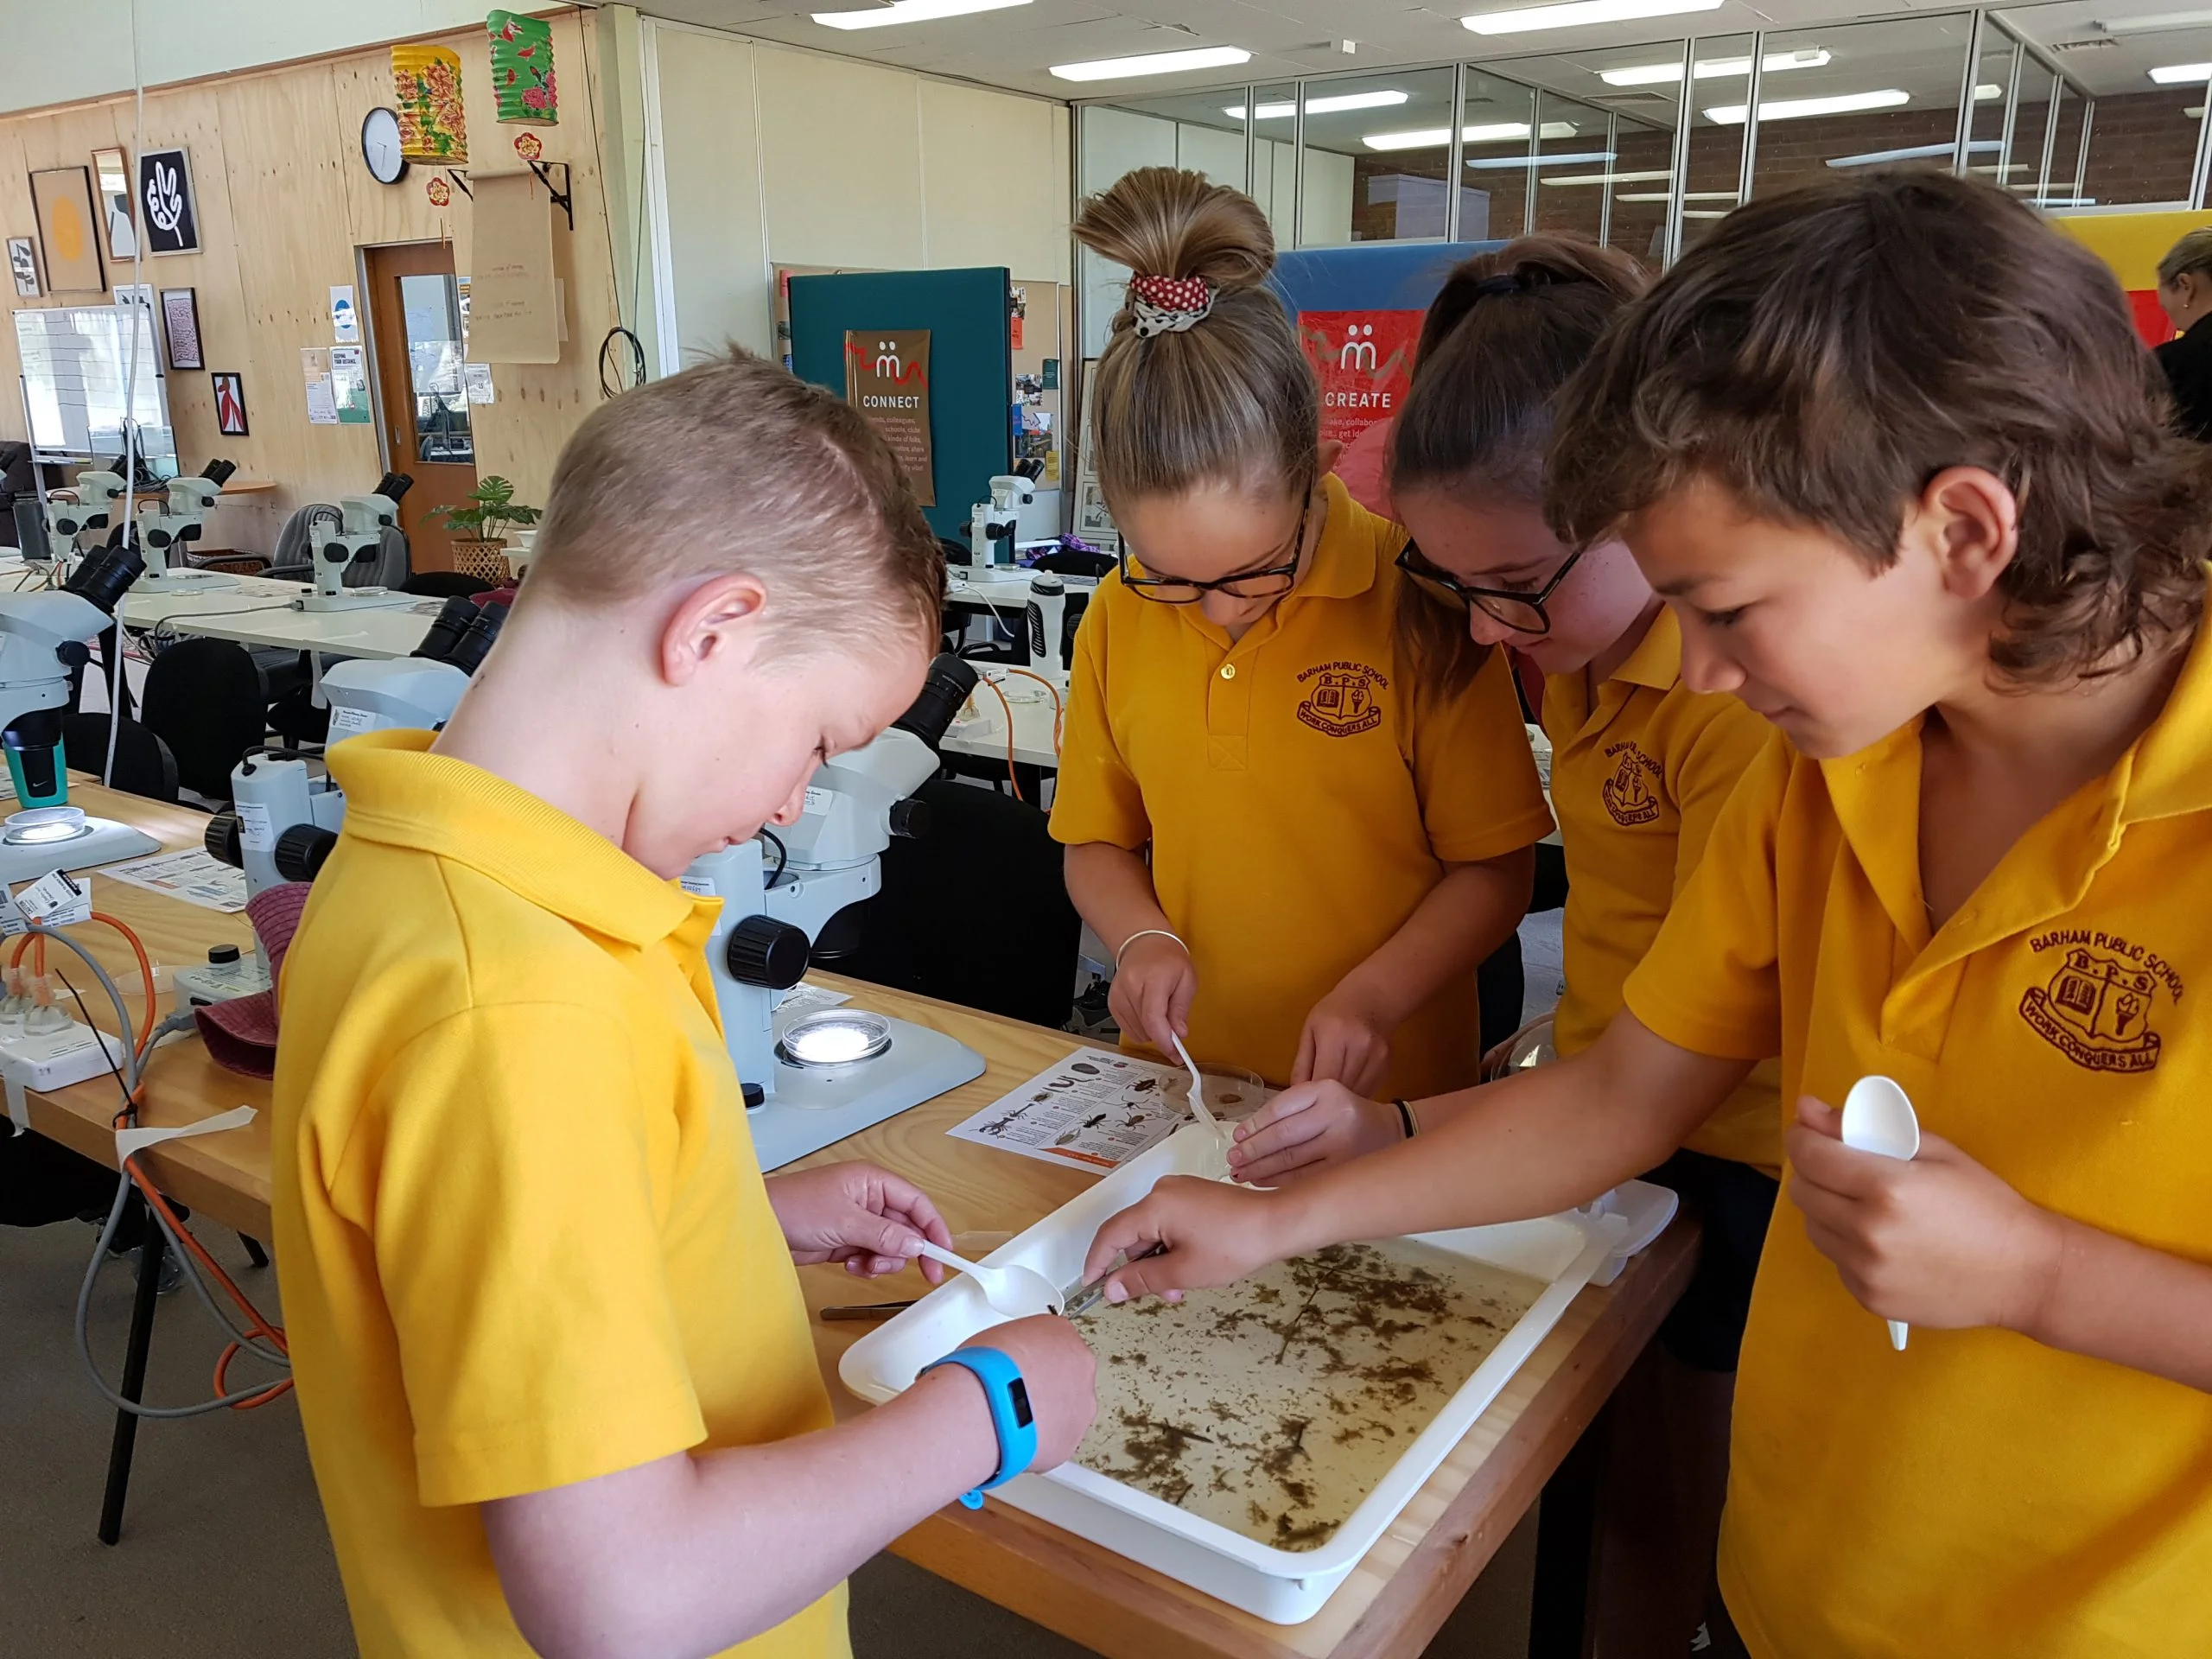 Students from Barham Public School learning about aquatic bugs